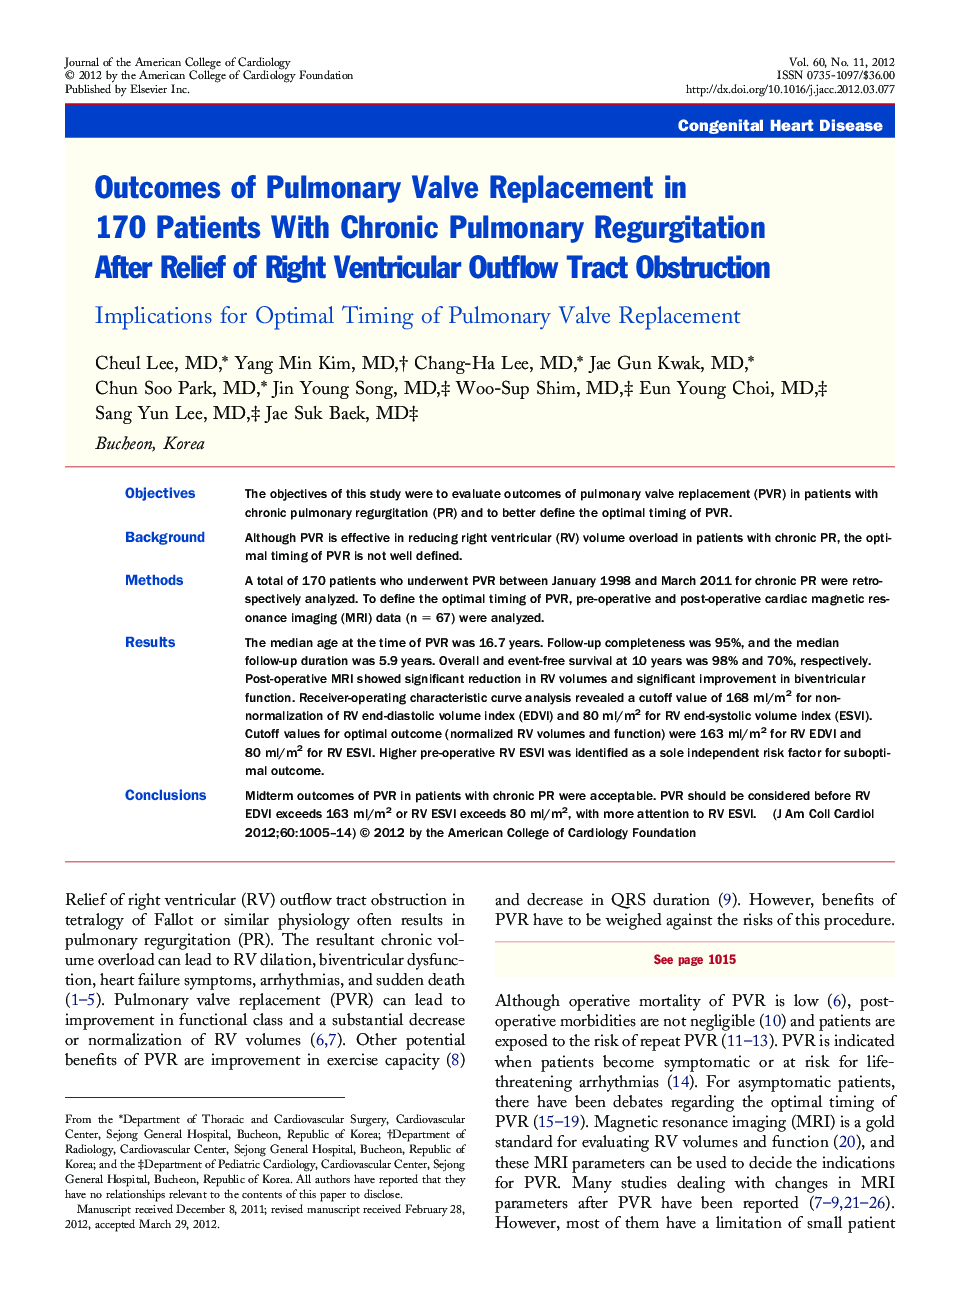 Outcomes of Pulmonary Valve Replacement in 170 Patients With Chronic Pulmonary Regurgitation After Relief of Right Ventricular Outflow Tract Obstruction : Implications for Optimal Timing of Pulmonary Valve Replacement